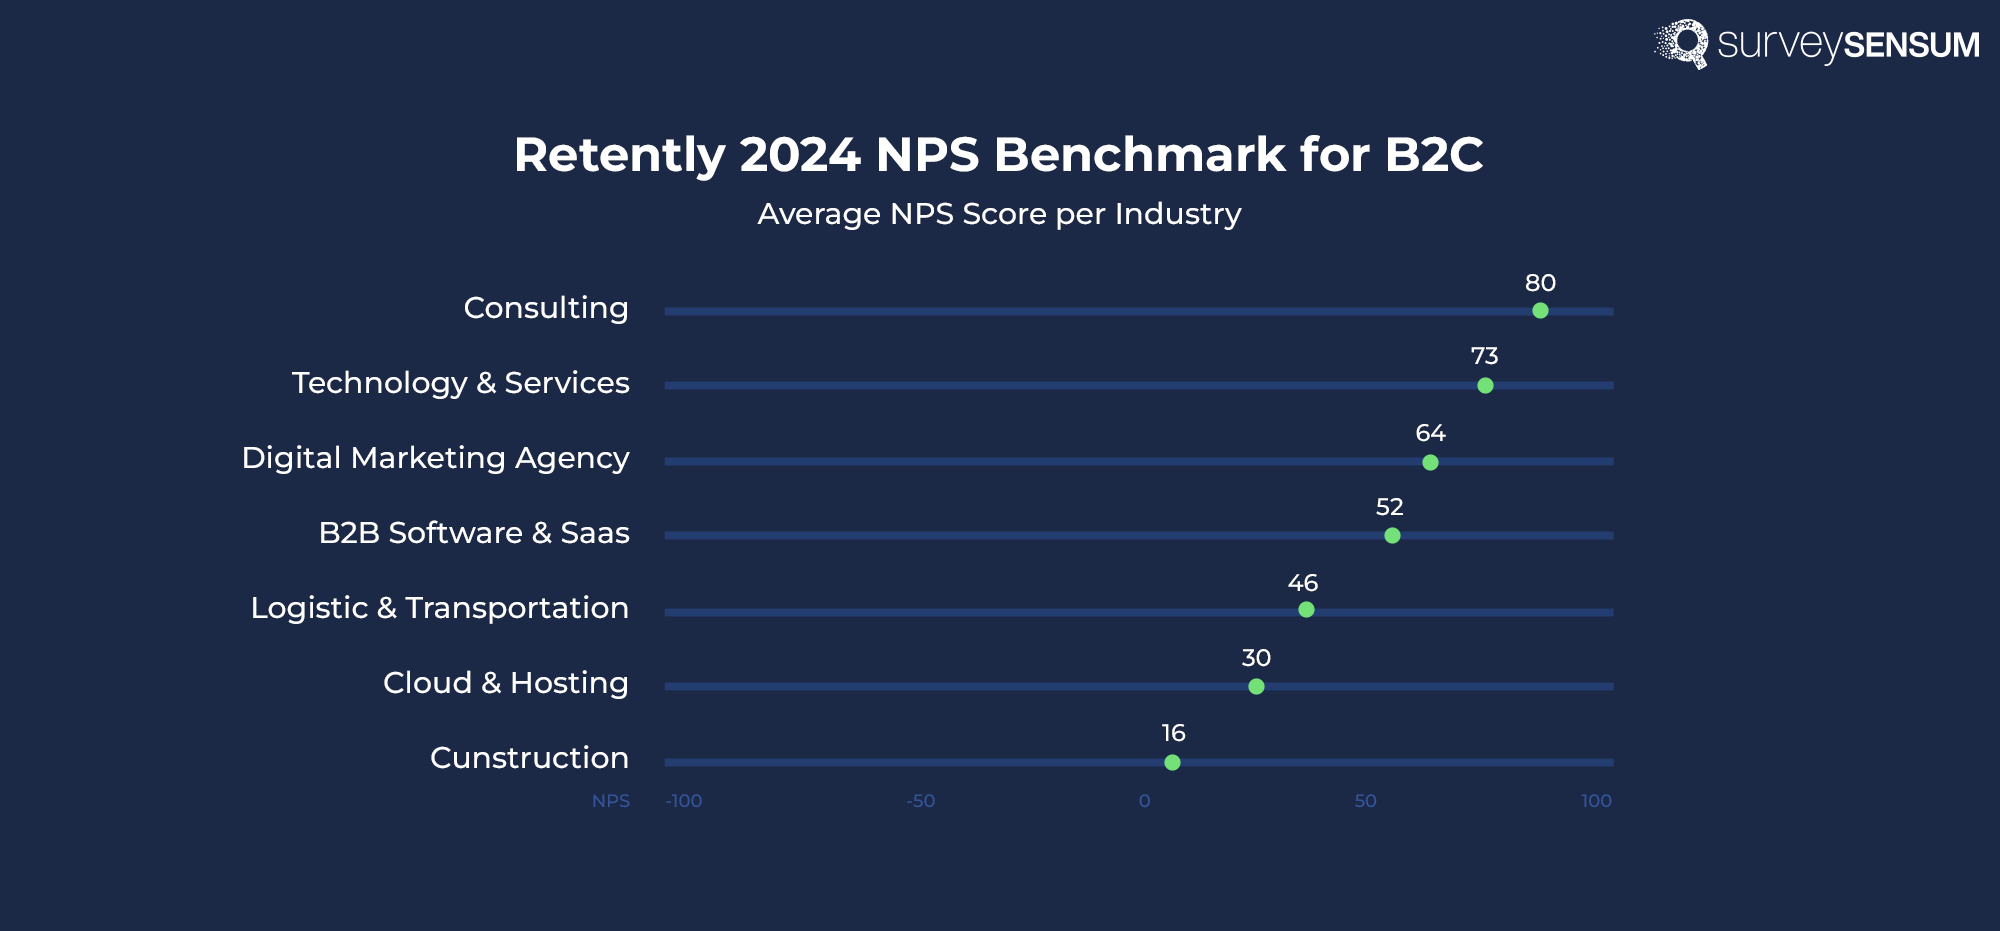 The image shows the average NPS score of different industries in the B2C sector. 